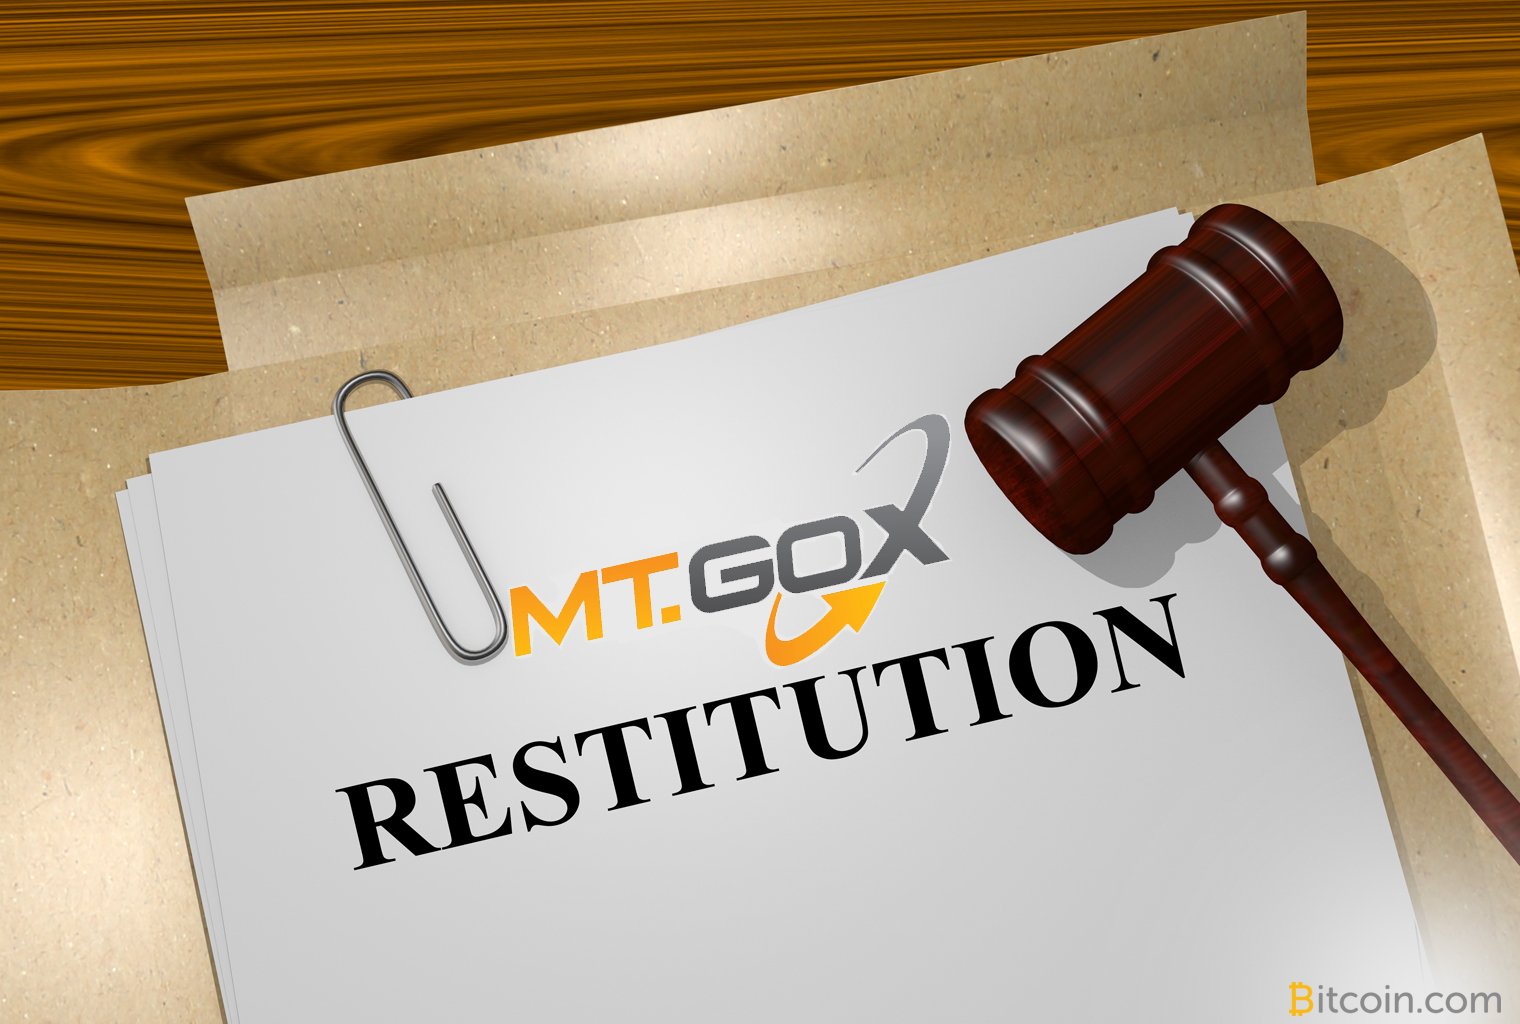 Mt. Gox Creditors Have a Second Chance to Appeal Claim Decisions